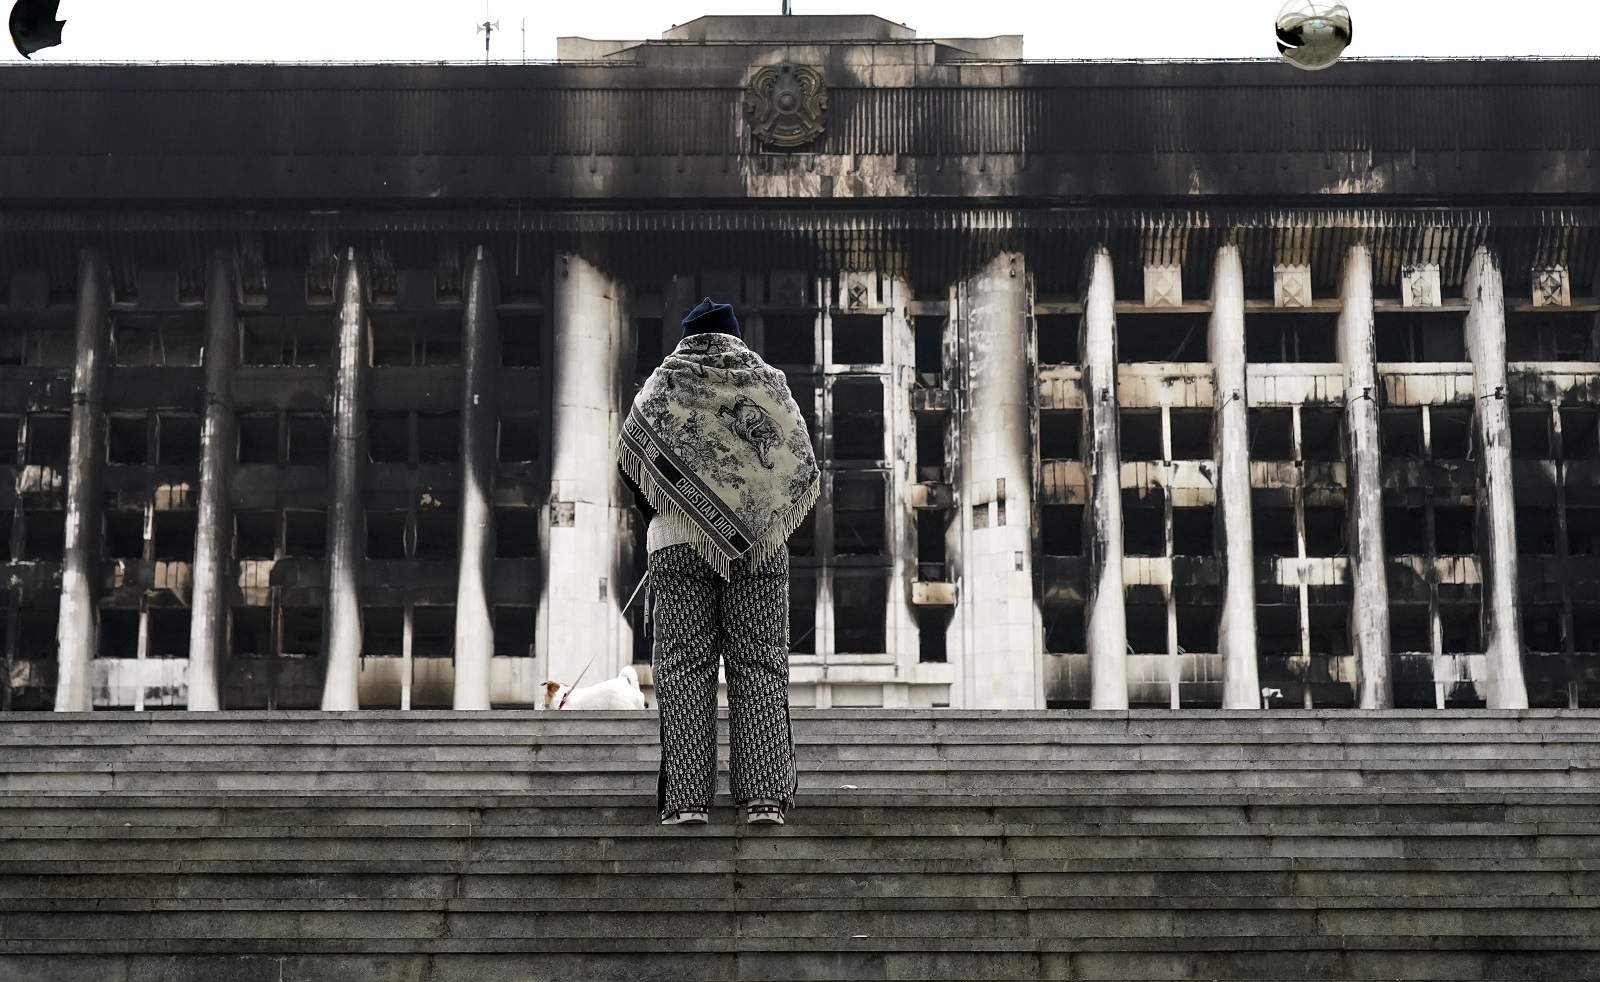 The aftermath of protests in Almaty, Kazakhstan, 11 January 2022 (Pavel Pavlov/Anadolu Agency via Getty Images)